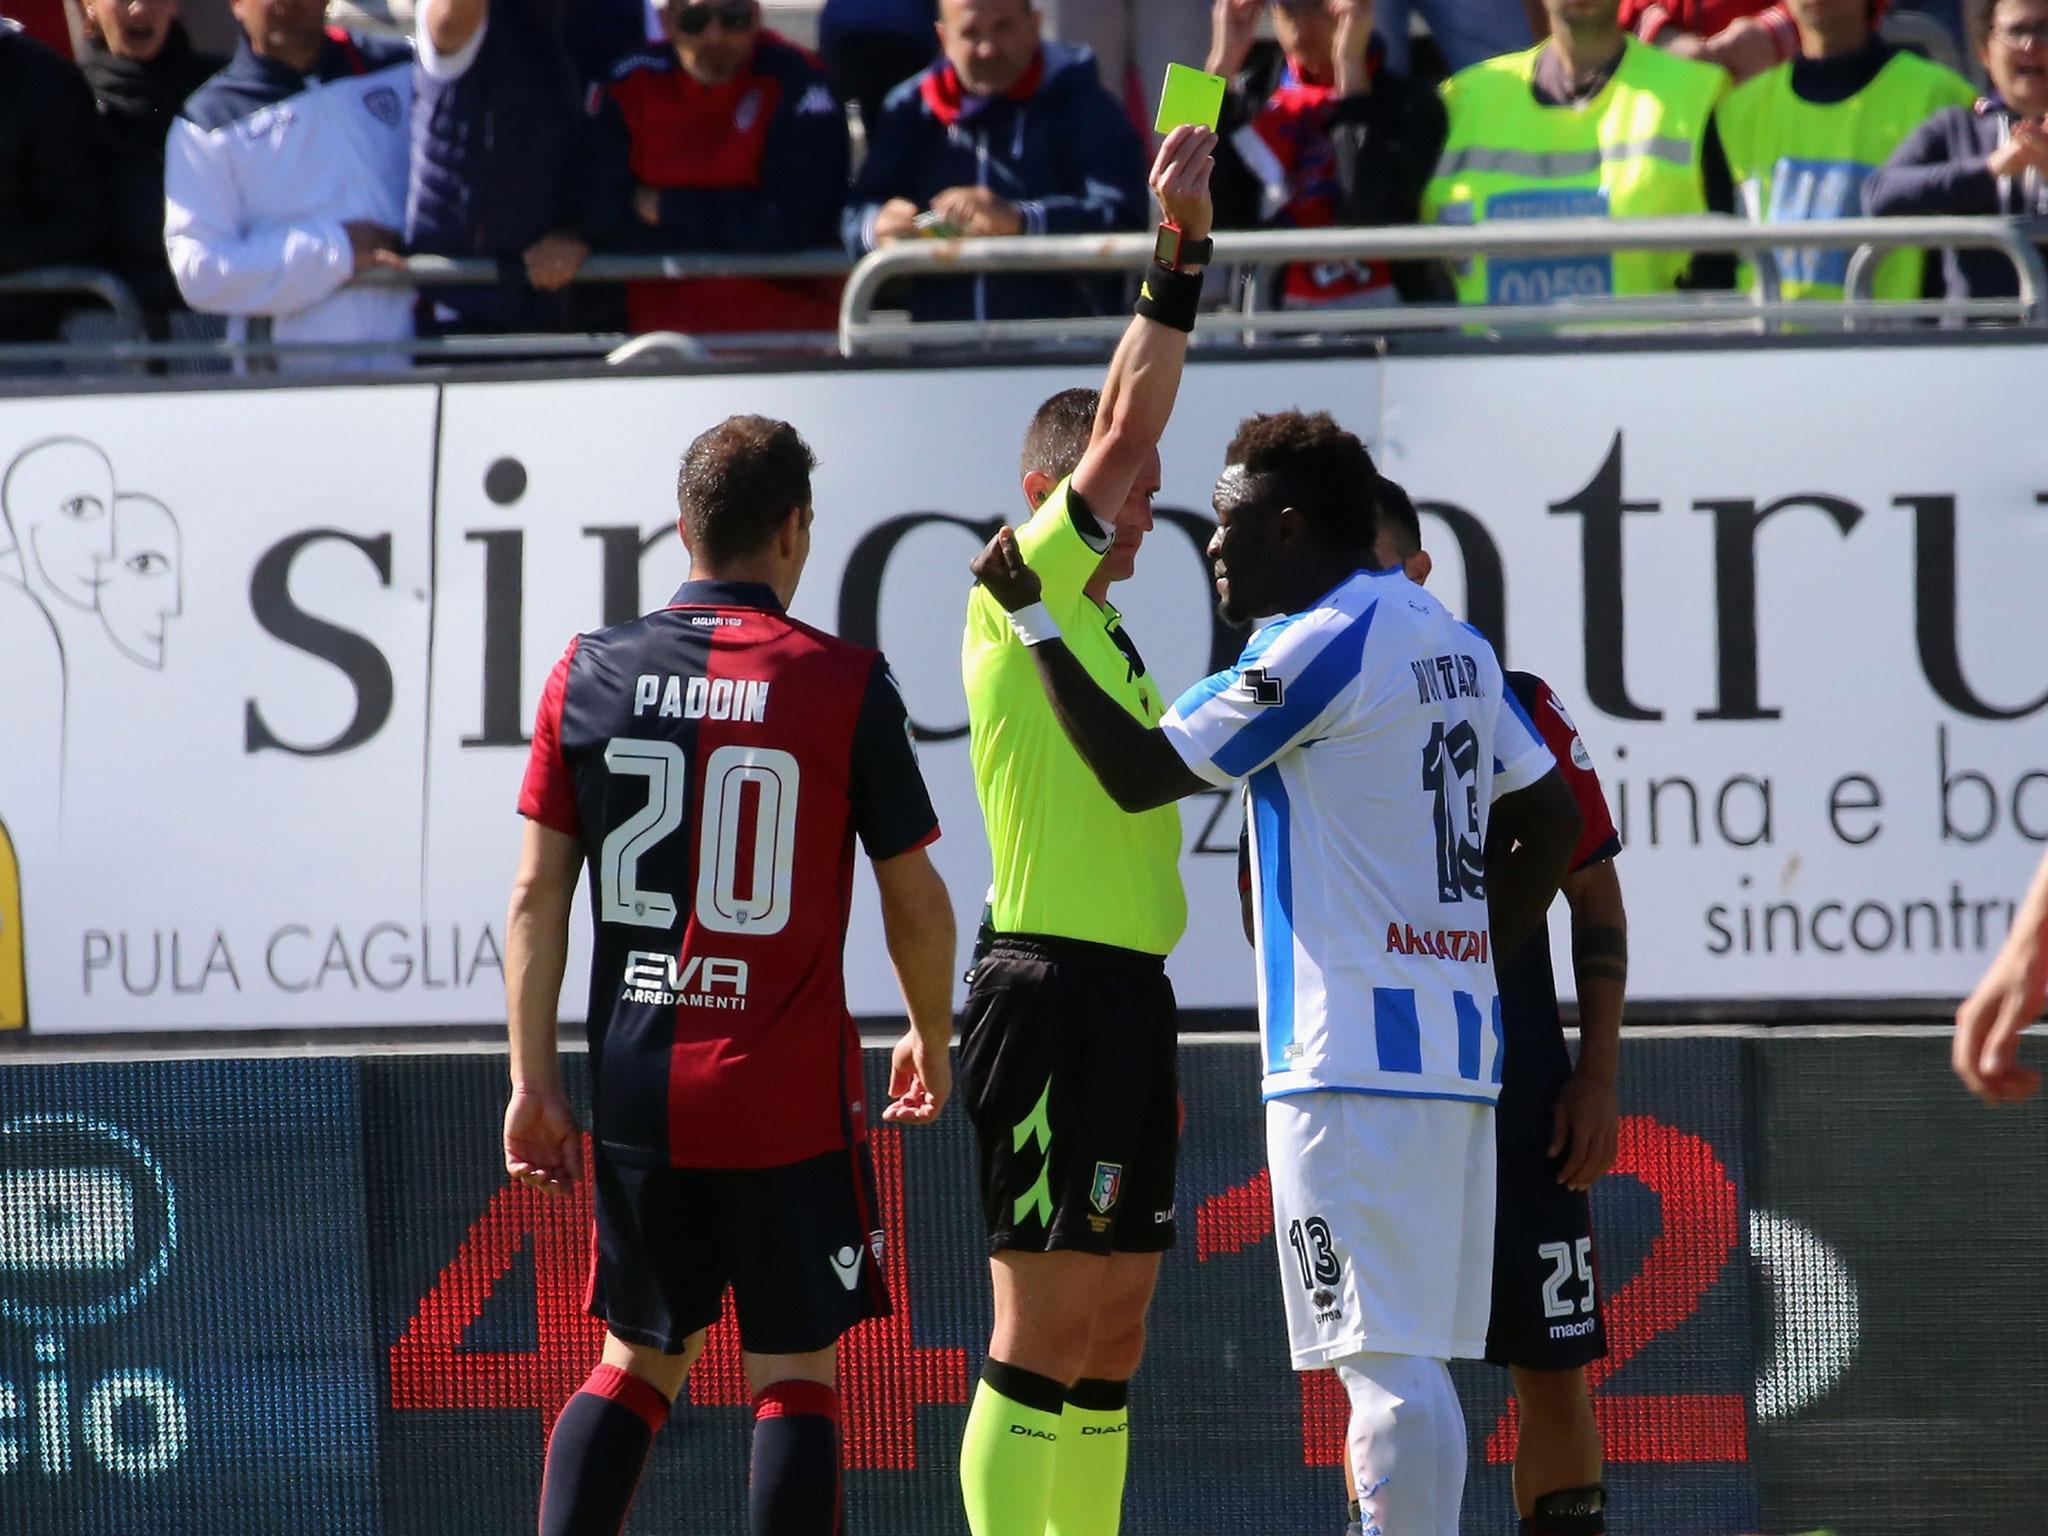 Sulley Muntari has been banned after being issued with a yellow card for reporting racial abuse